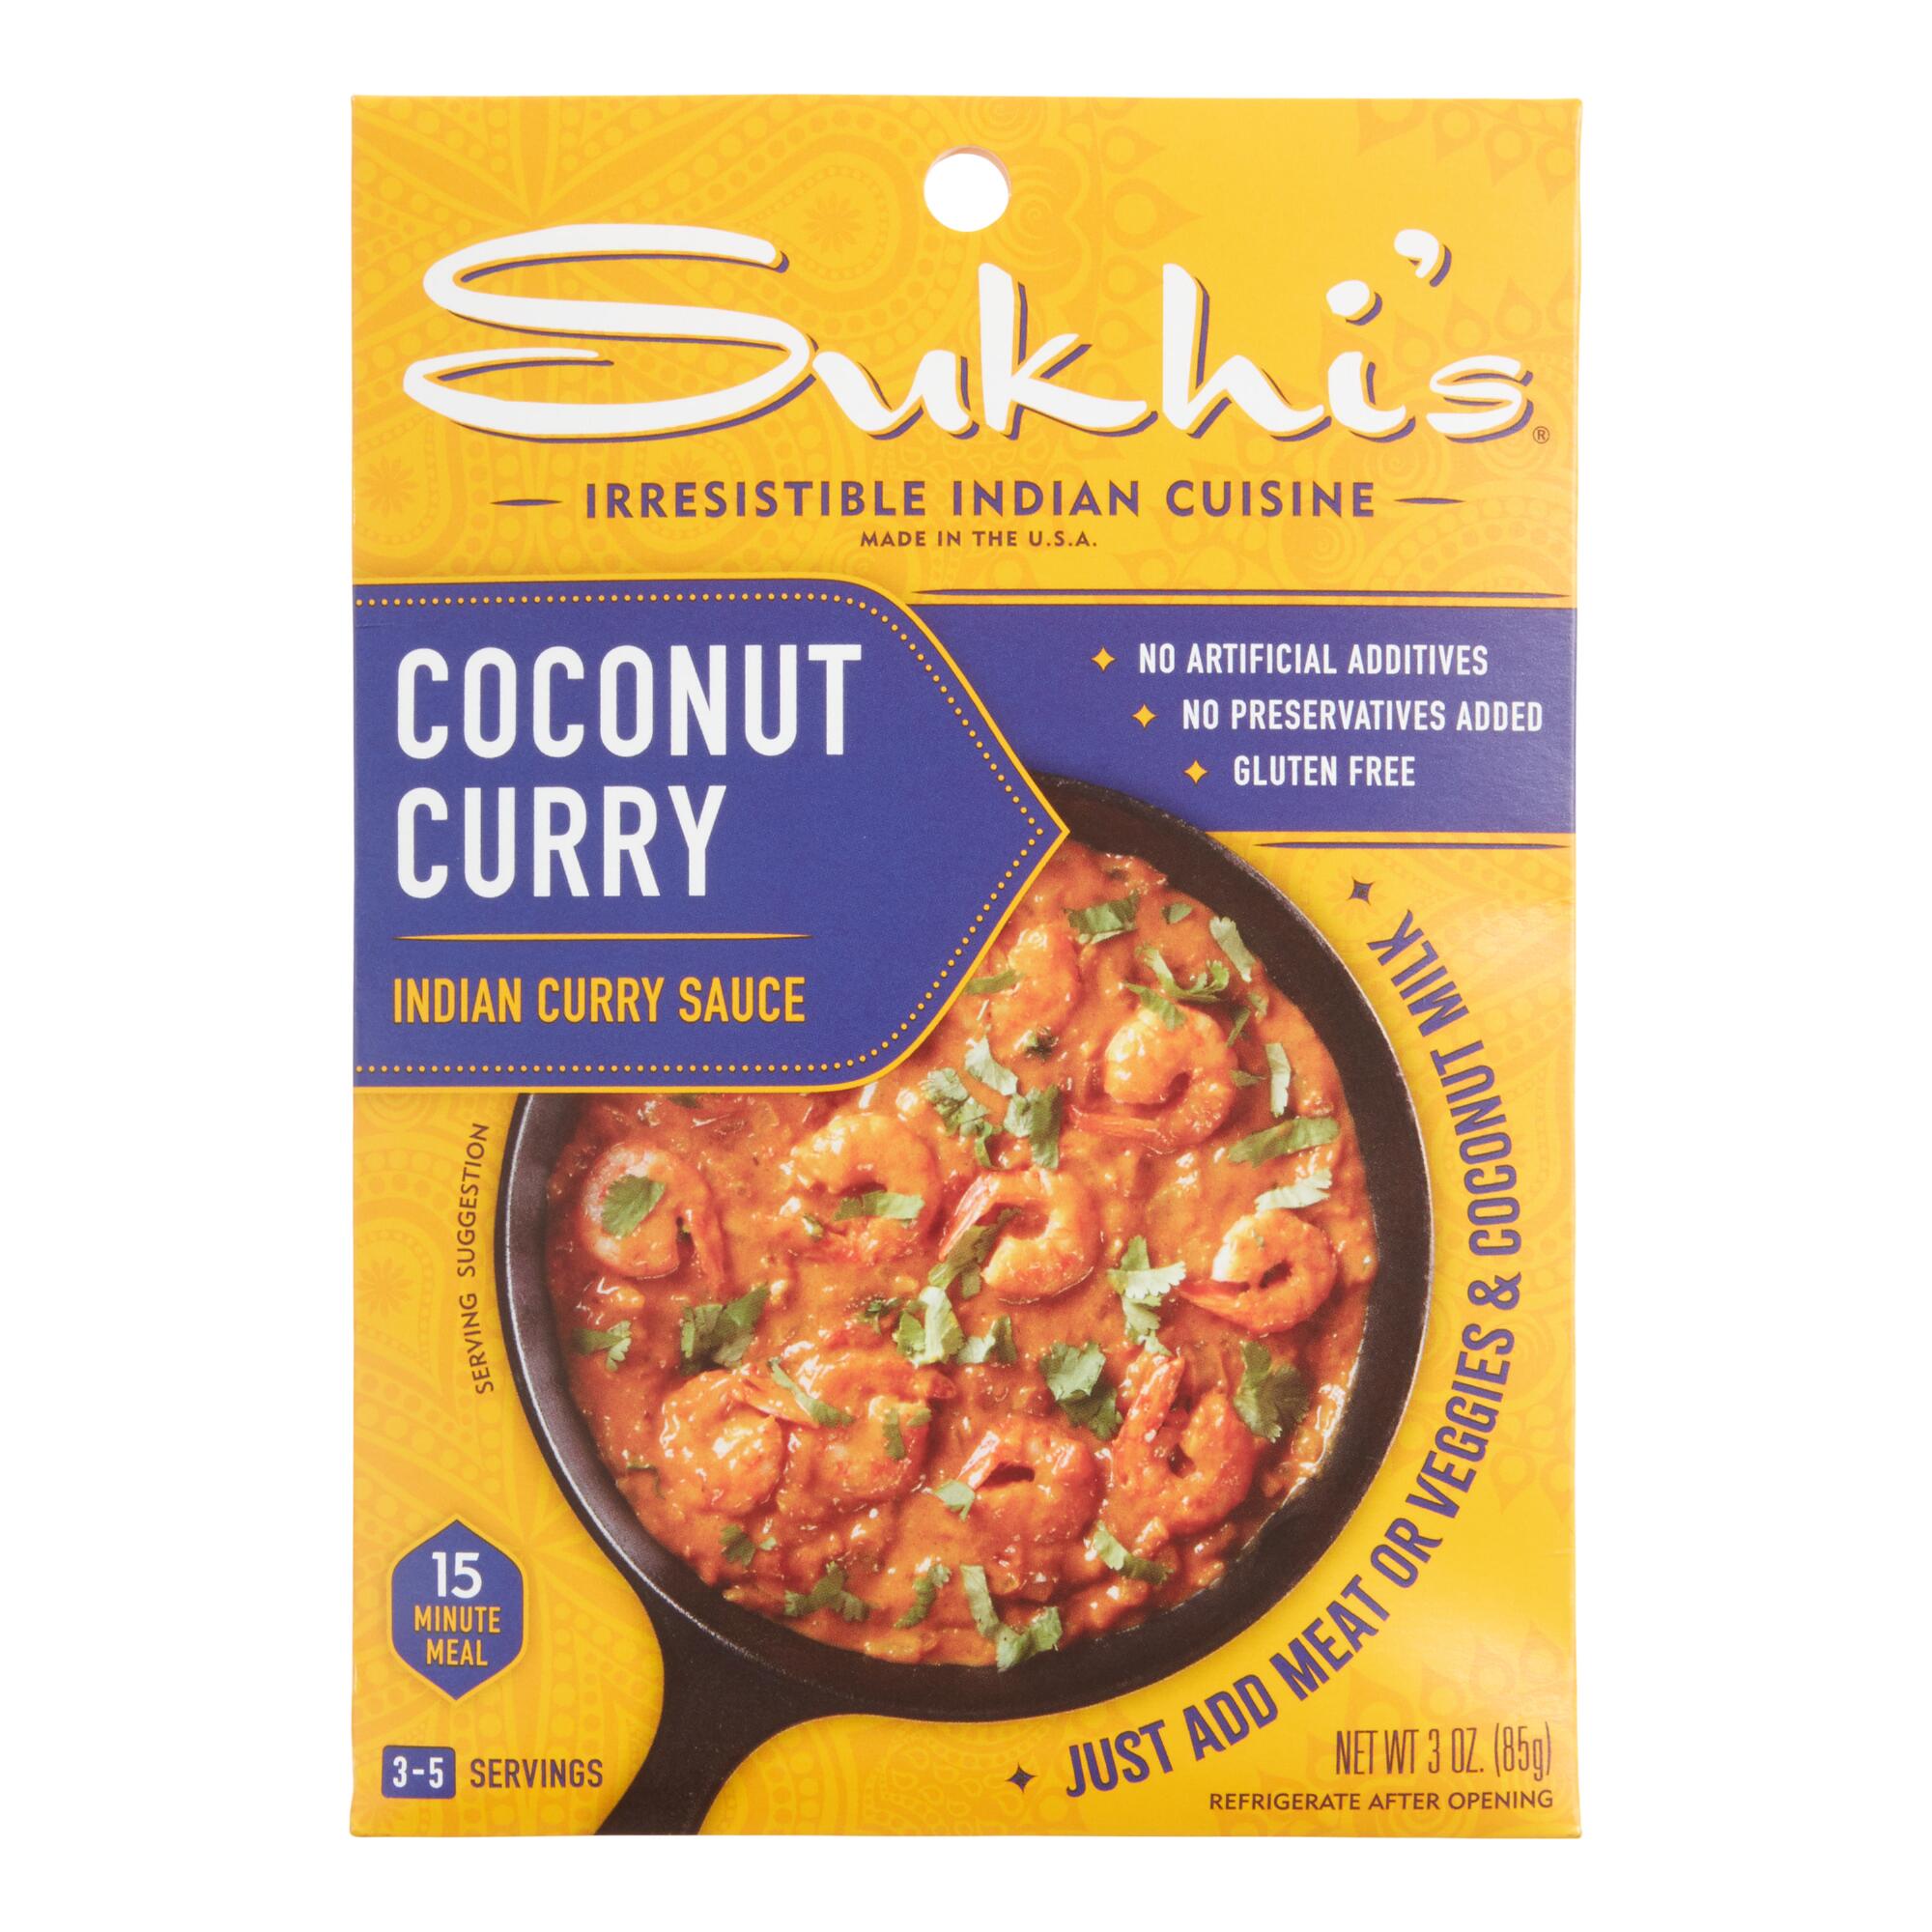 Sukhi's Coconut Curry Sauce by World Market